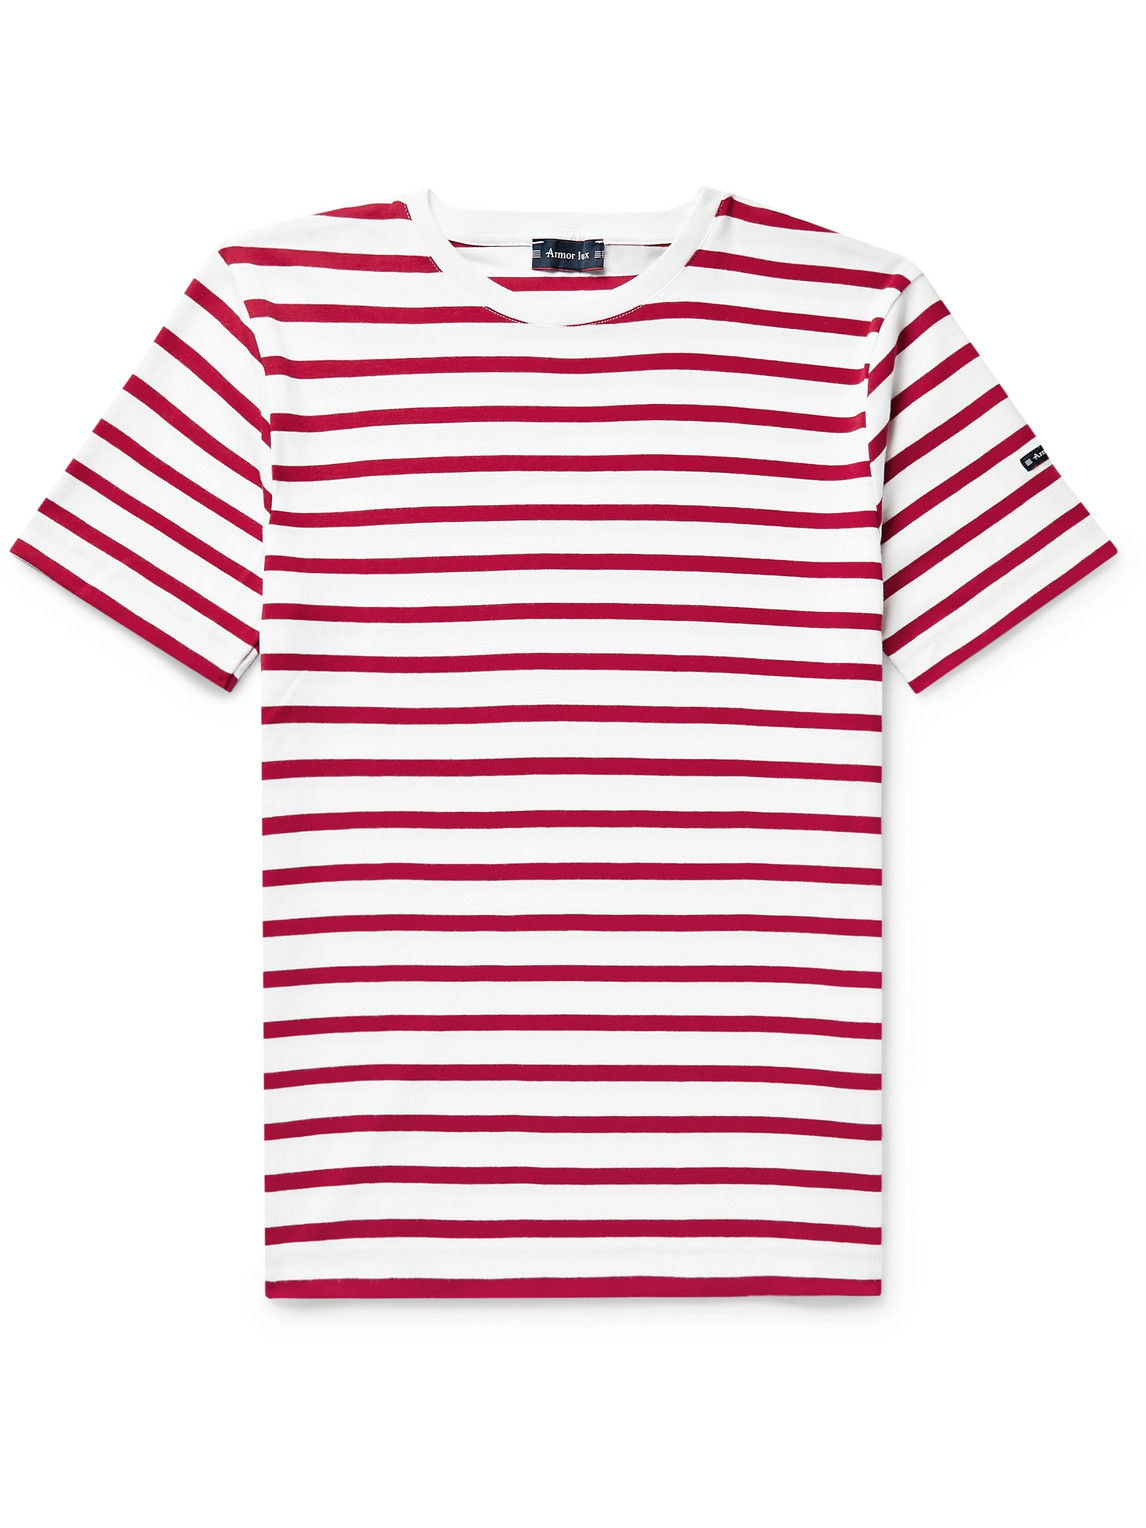 Armor-lux Slim-fit Striped Cotton-jersey T-shirt In Red